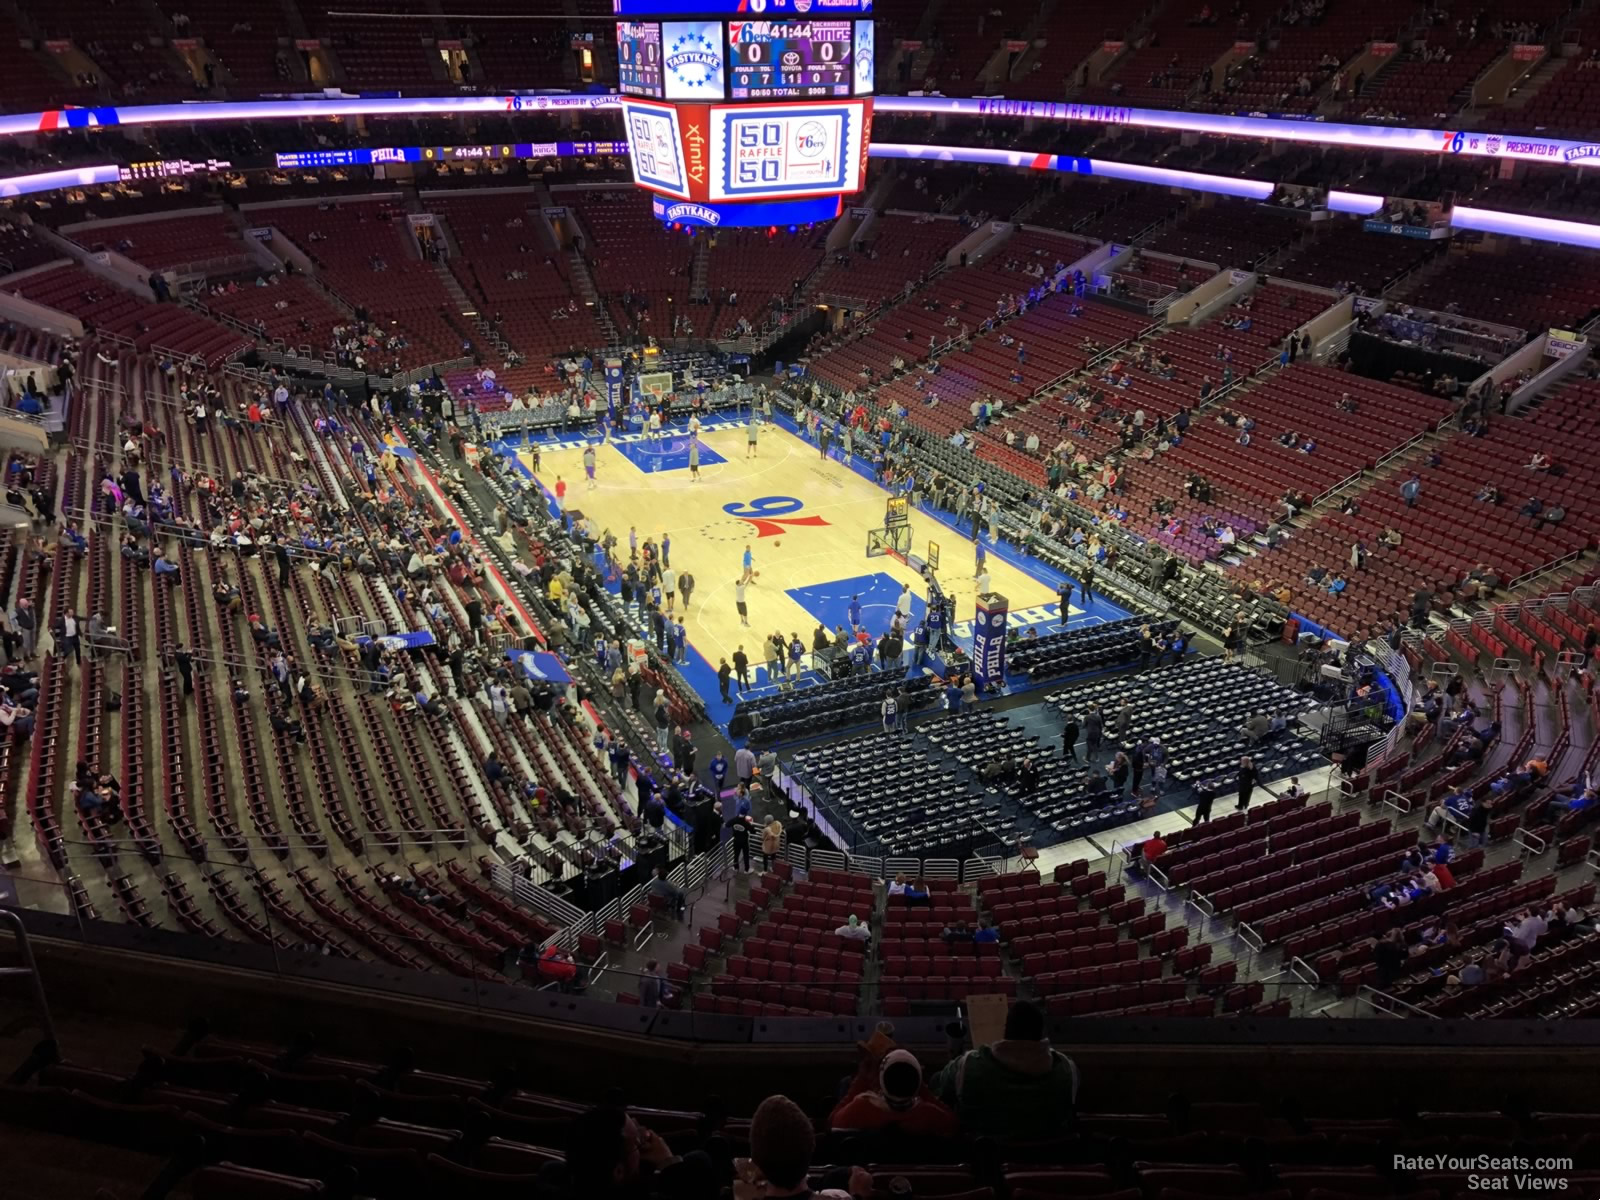 section 205a, row 7 seat view  for basketball - wells fargo center